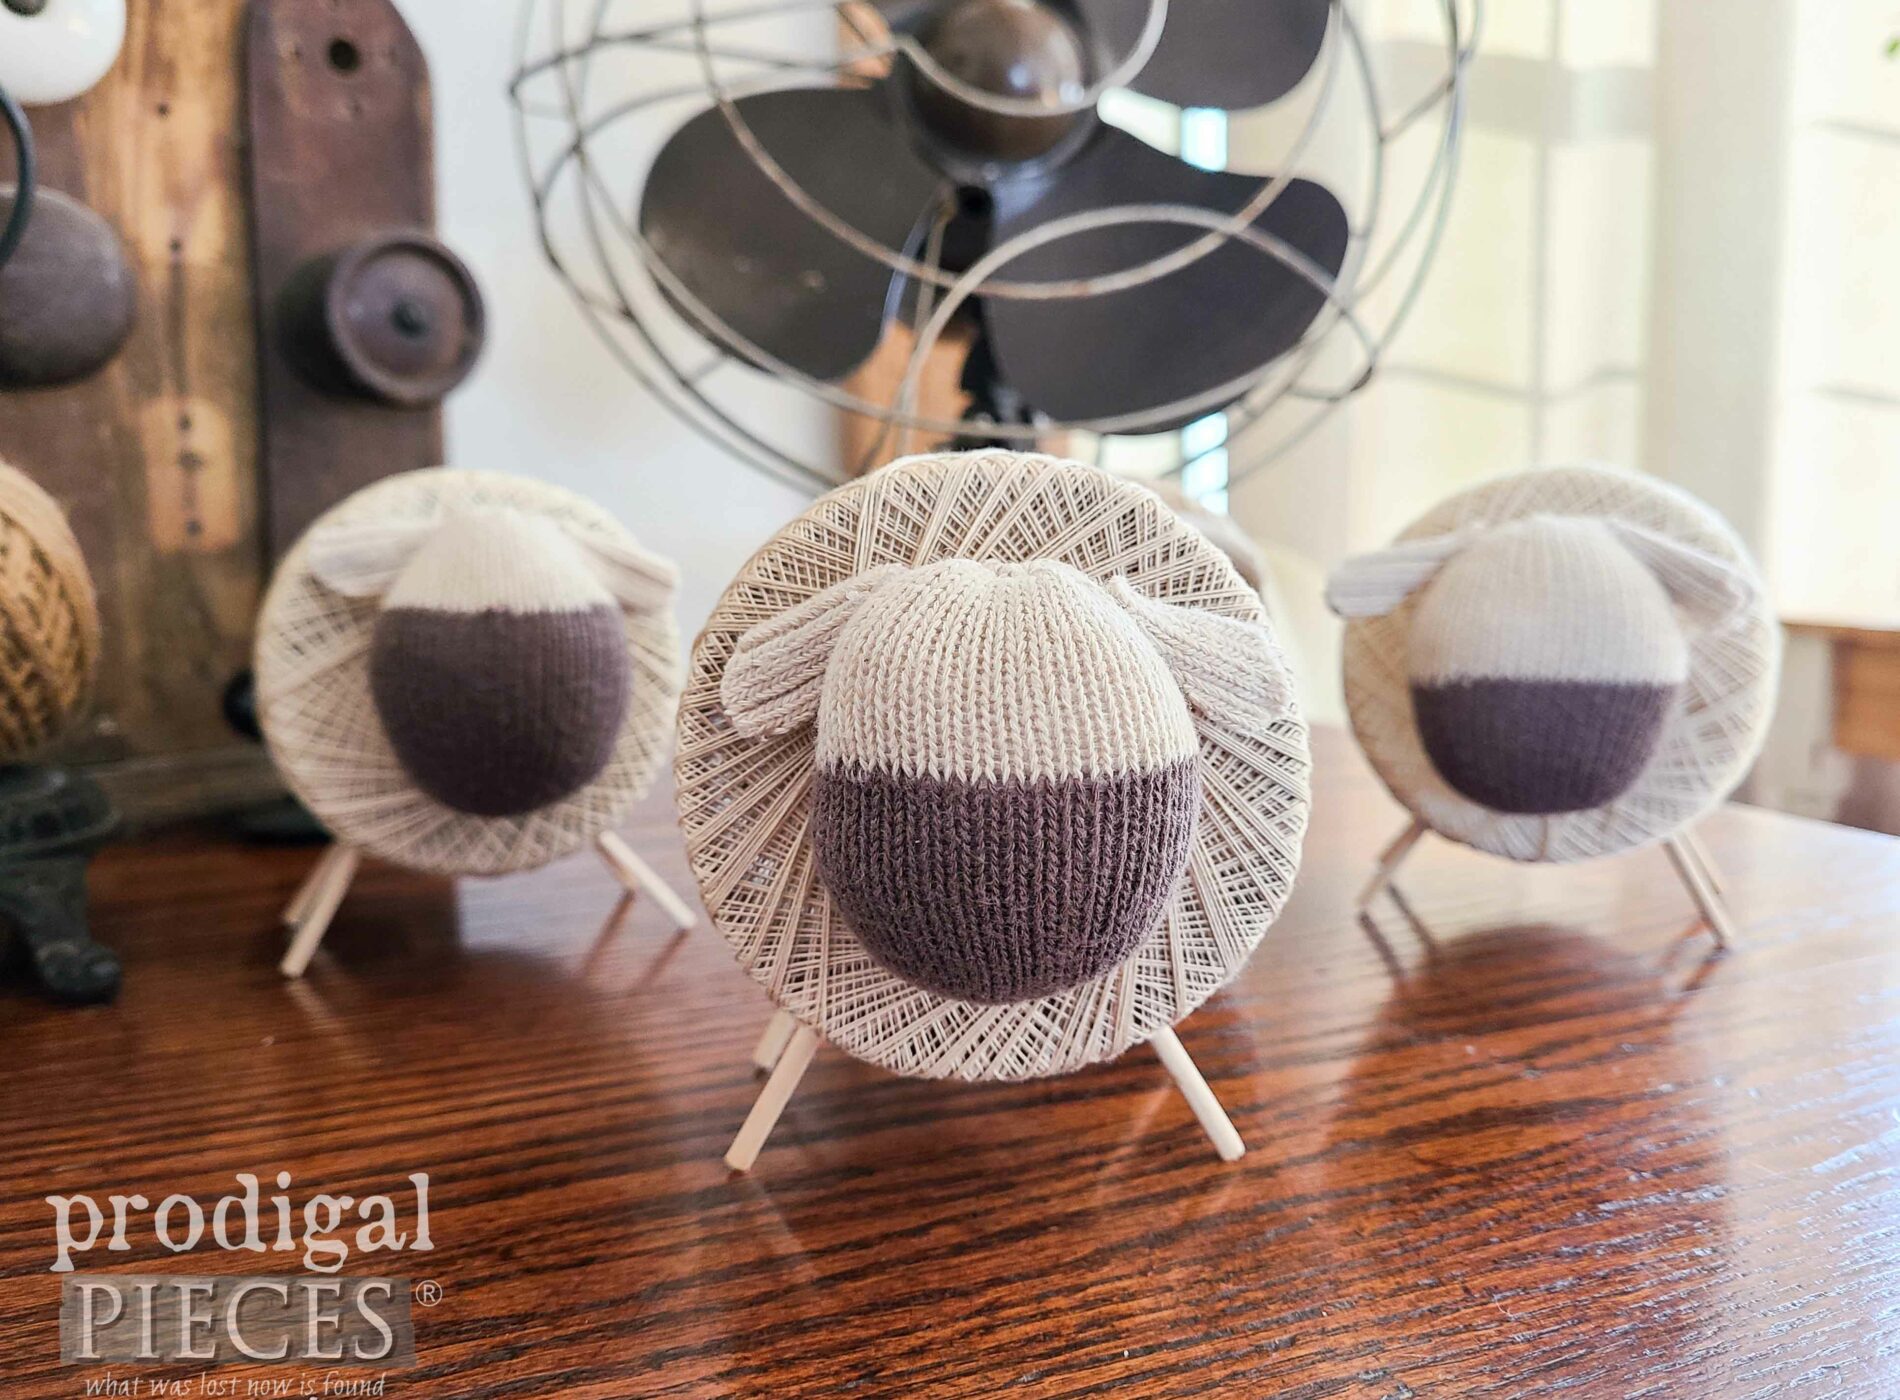 Adorable Spool Sheep Handmade by Larissa of Prodigal Pieces | available at shop.prodigalpieces.com #prodigalpieces